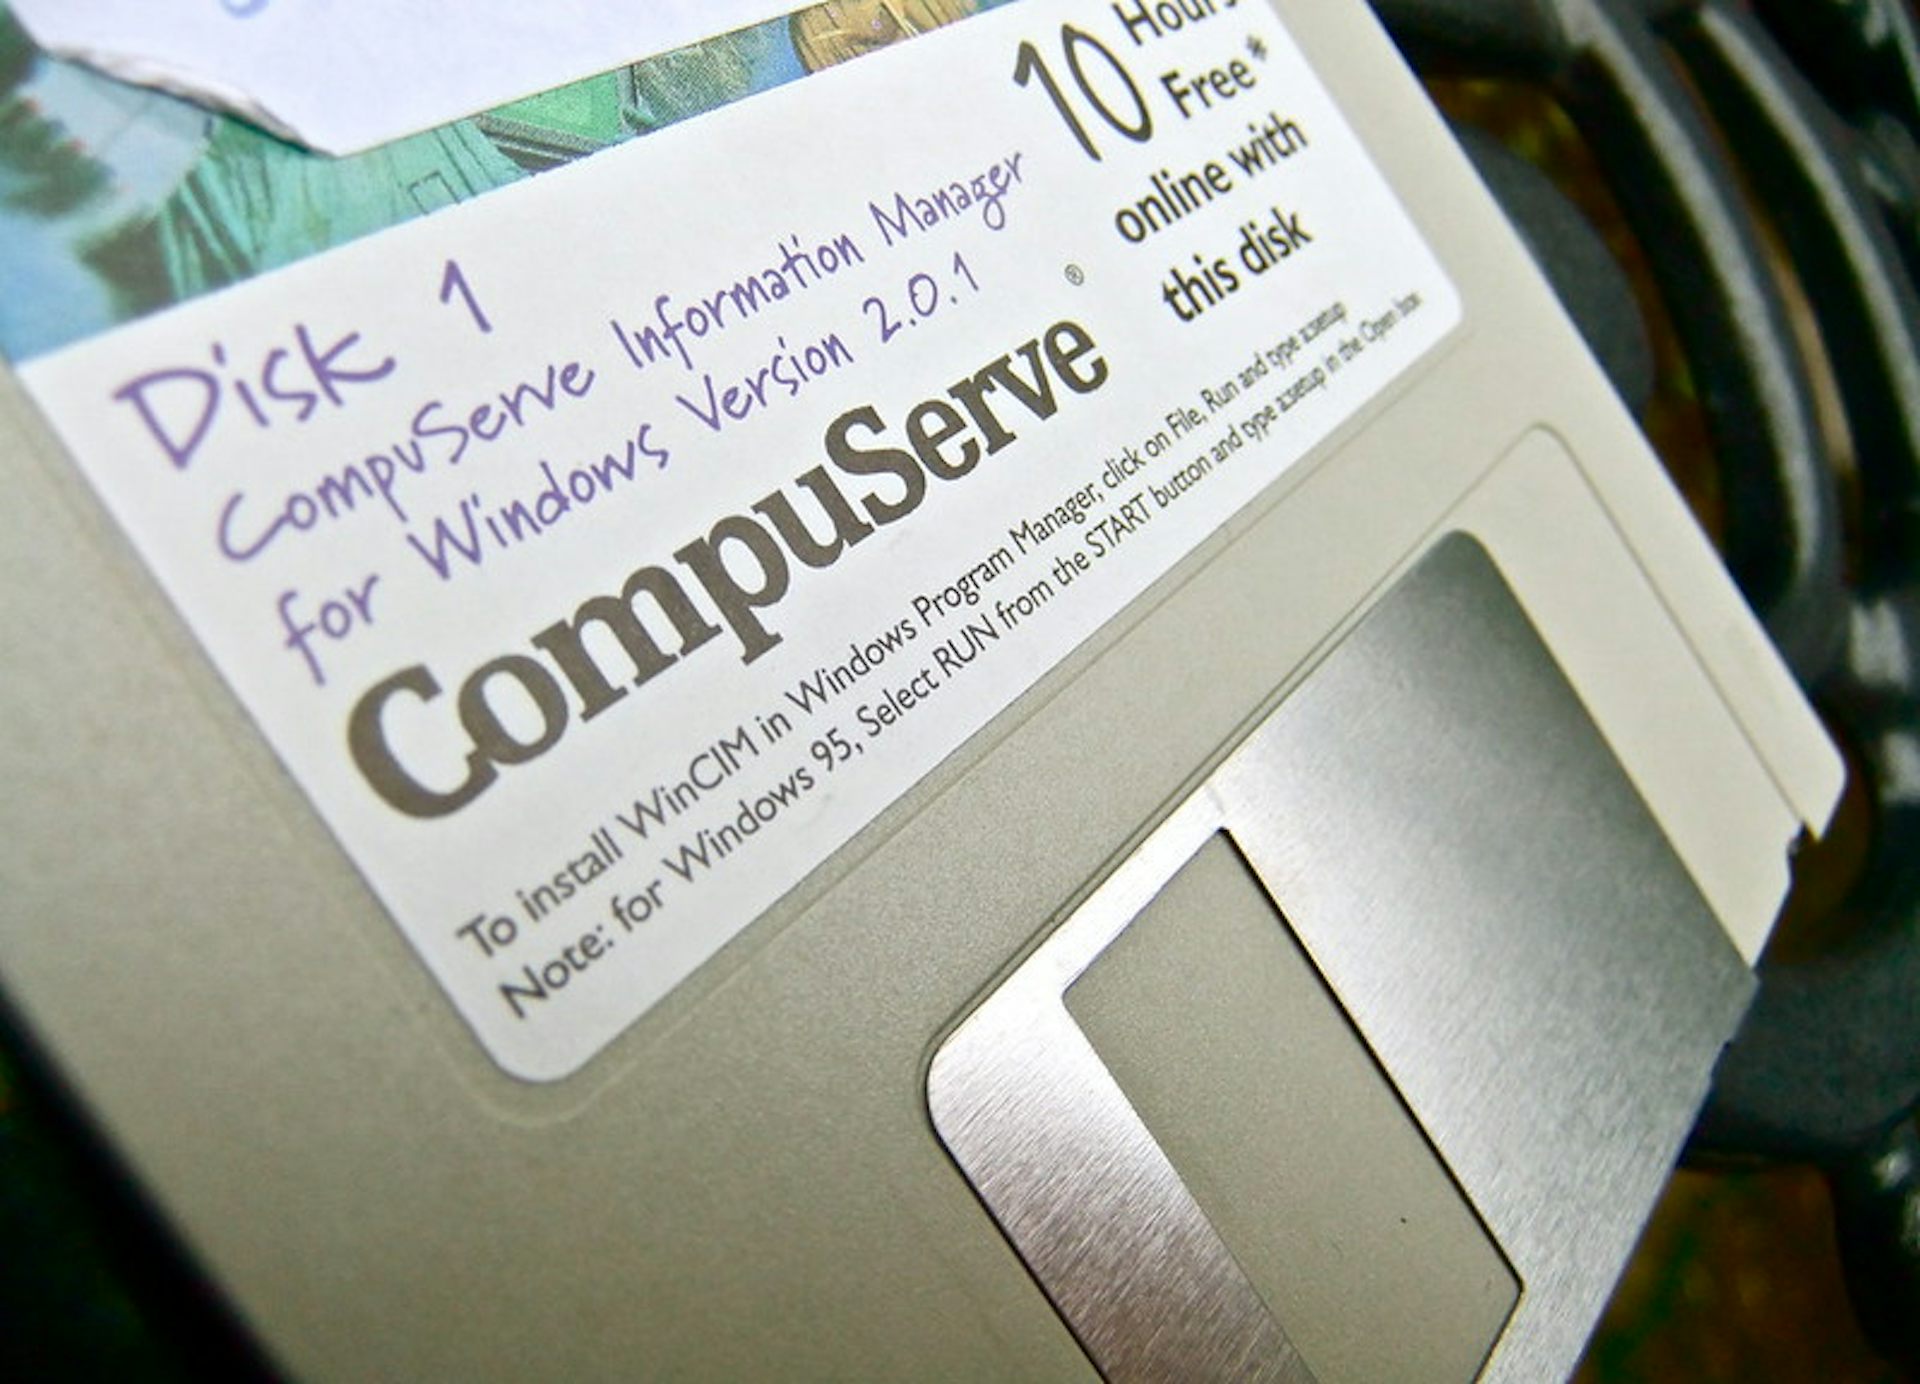 An installation floppy for CompuServe Information Manager